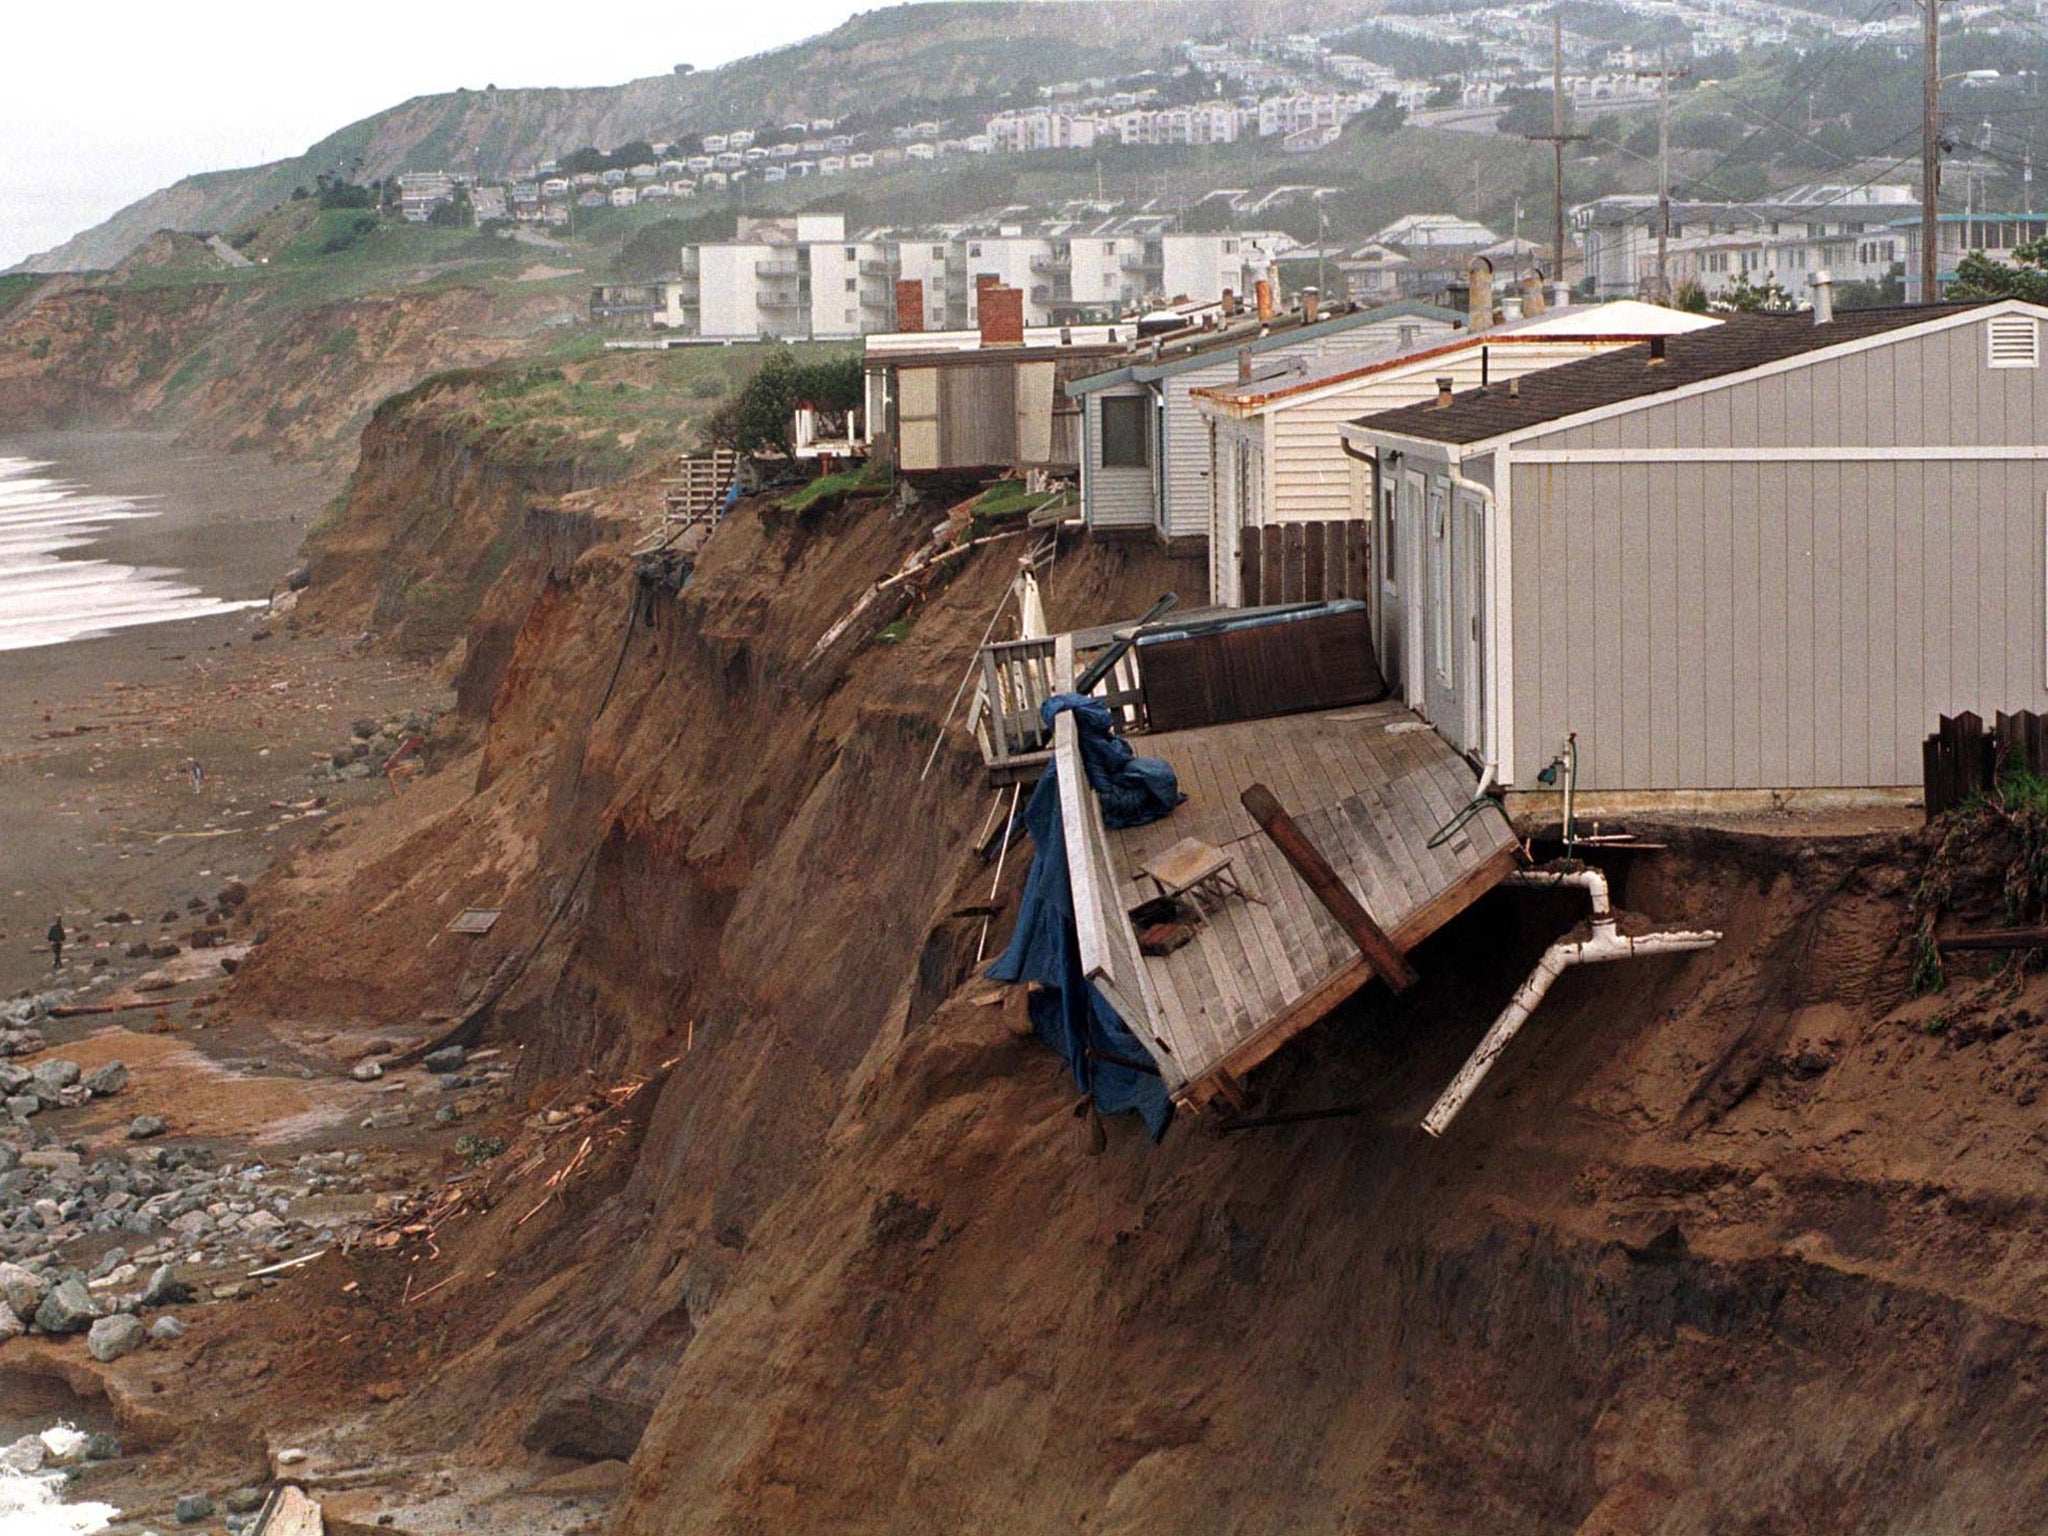 Homes in Pacifica, California, slide into the ocean during the 1997-98 El Nino event which caused extreme weather worldwide